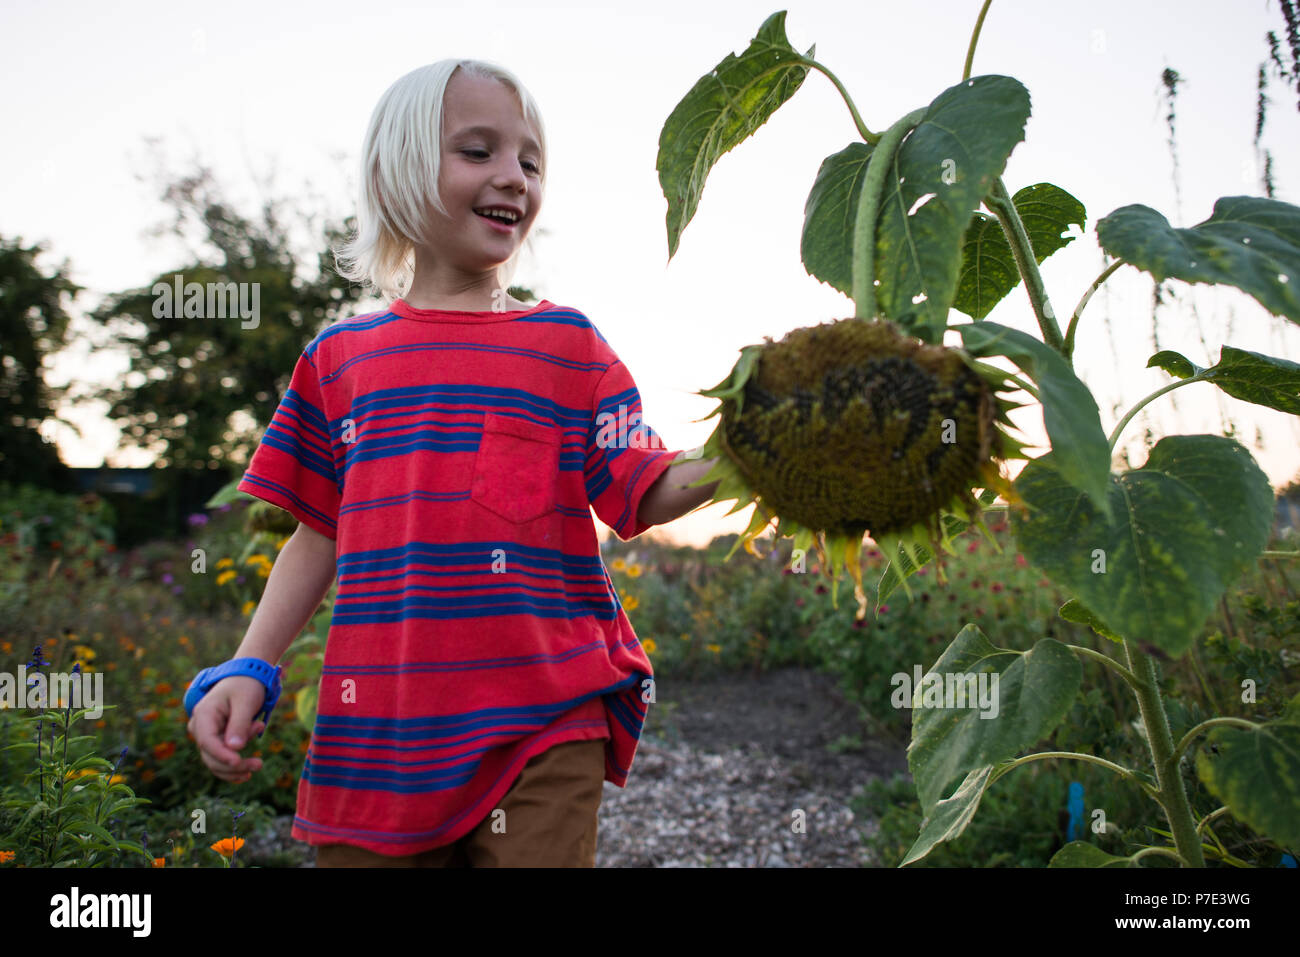 Blond haired boy in garden looking at drooping sunflower seedhead Stock Photo